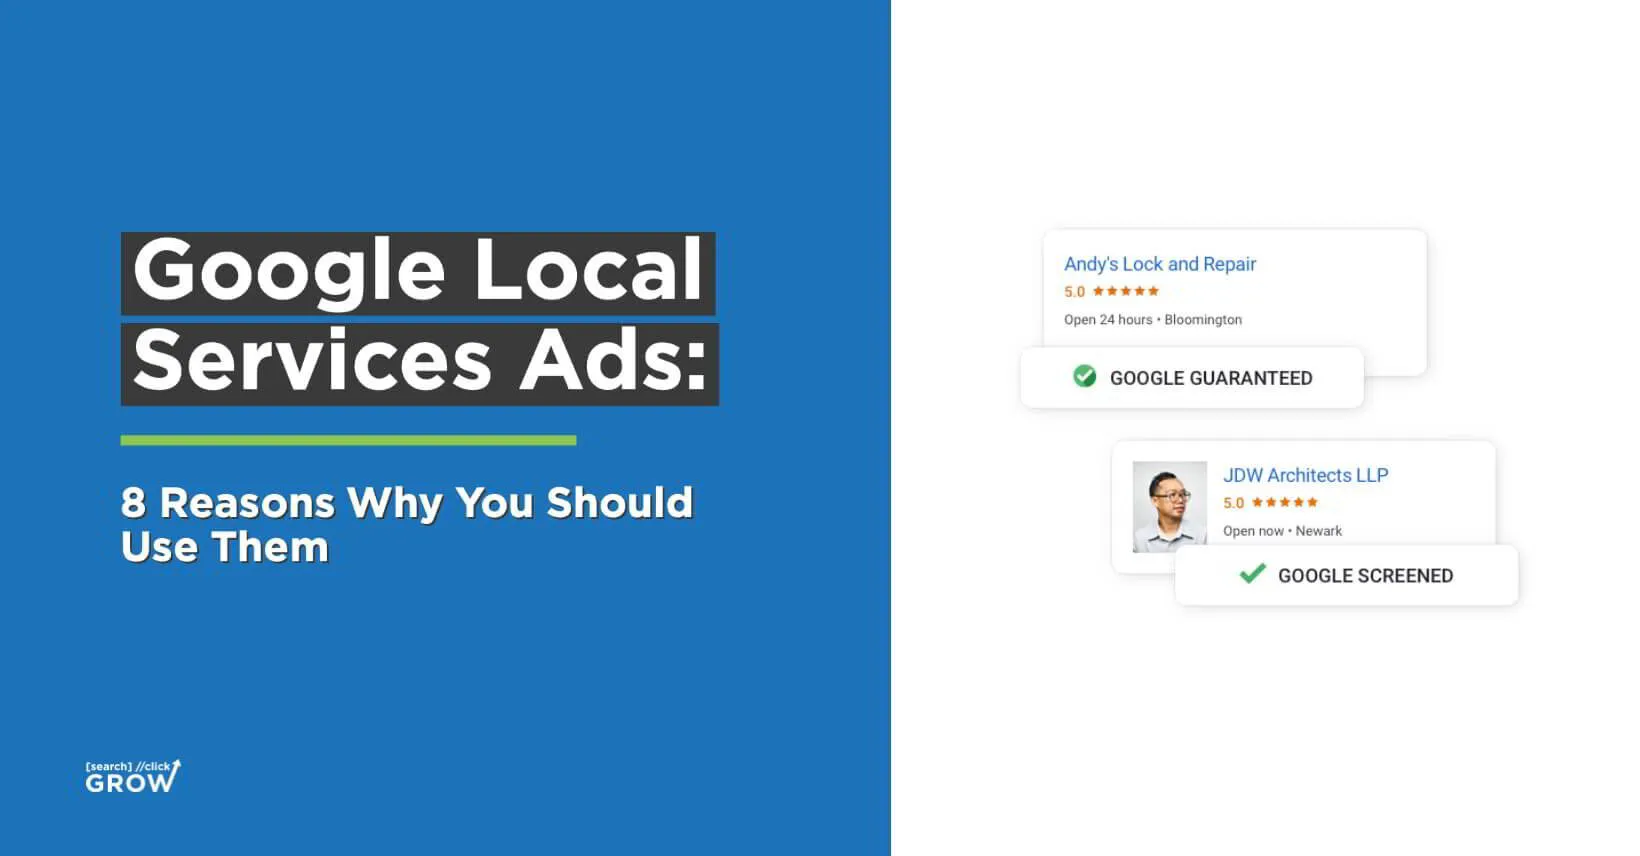 Google Local Services Ads: 8 Reasons Why You Should Use Them